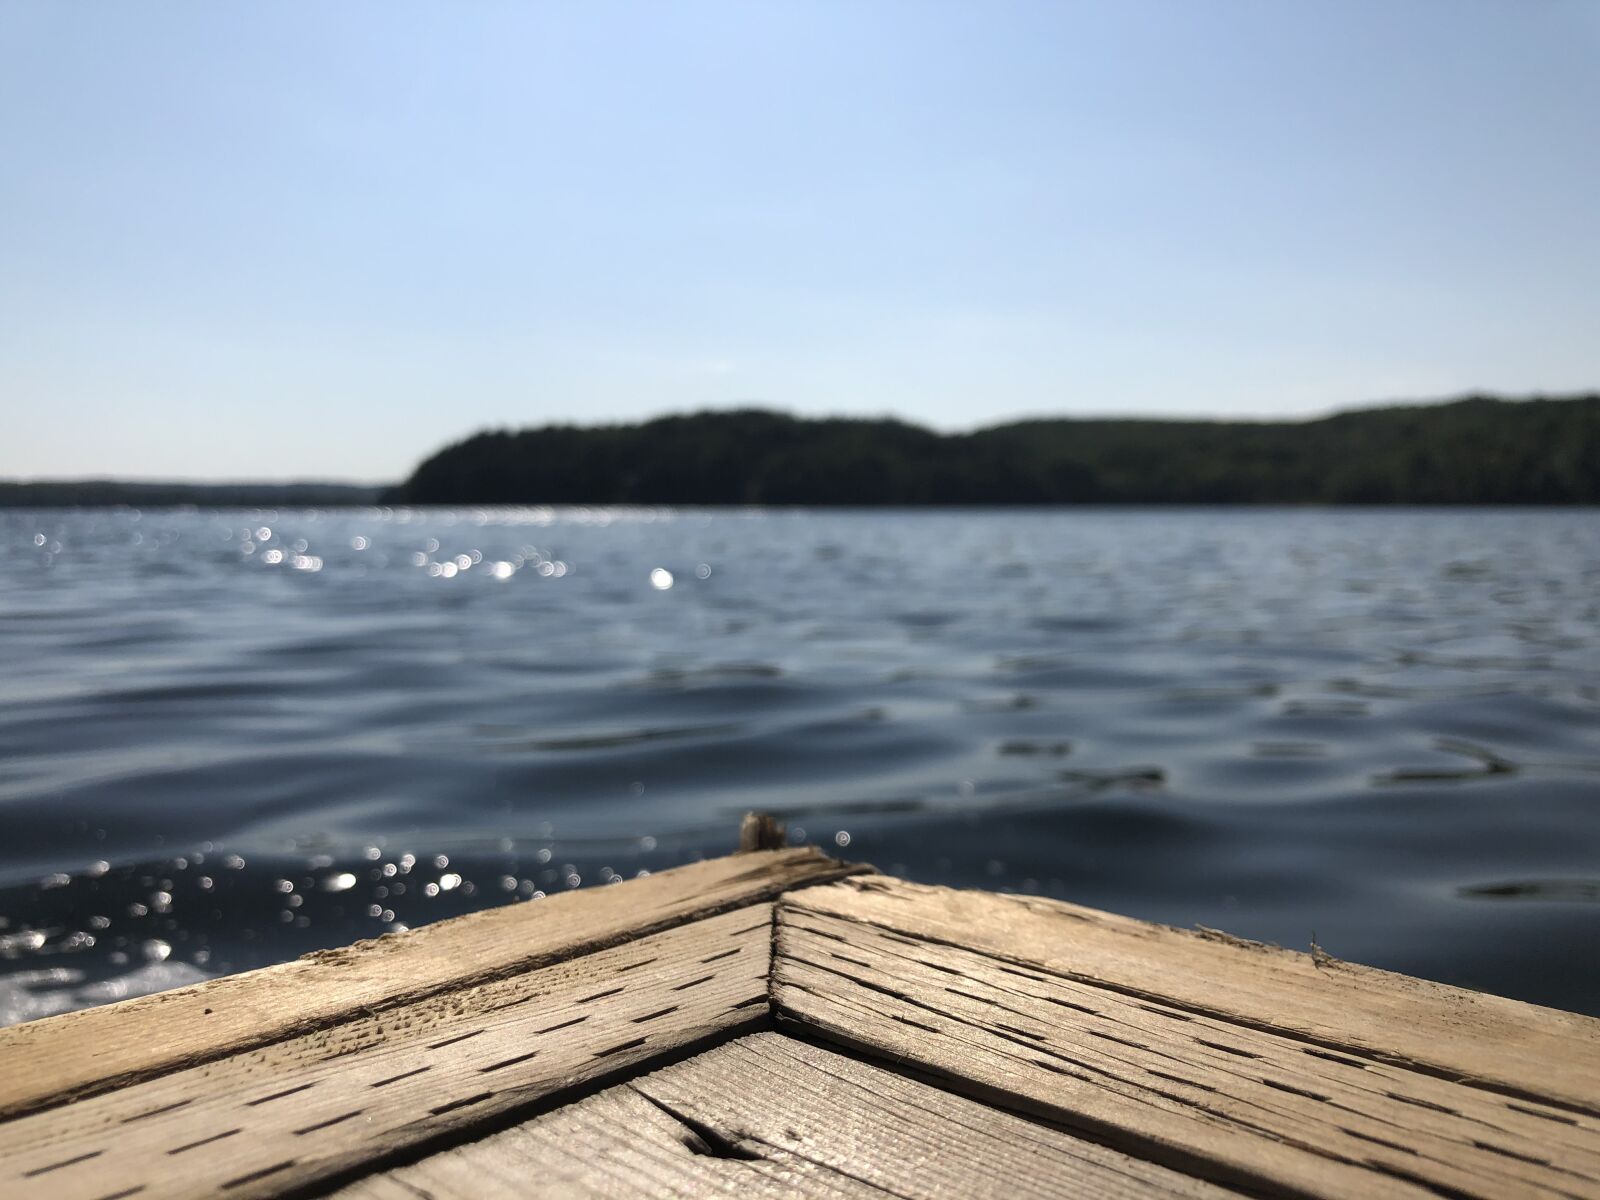 Apple iPhone X + iPhone X back dual camera 4mm f/1.8 sample photo. Dock, water, foreground photography